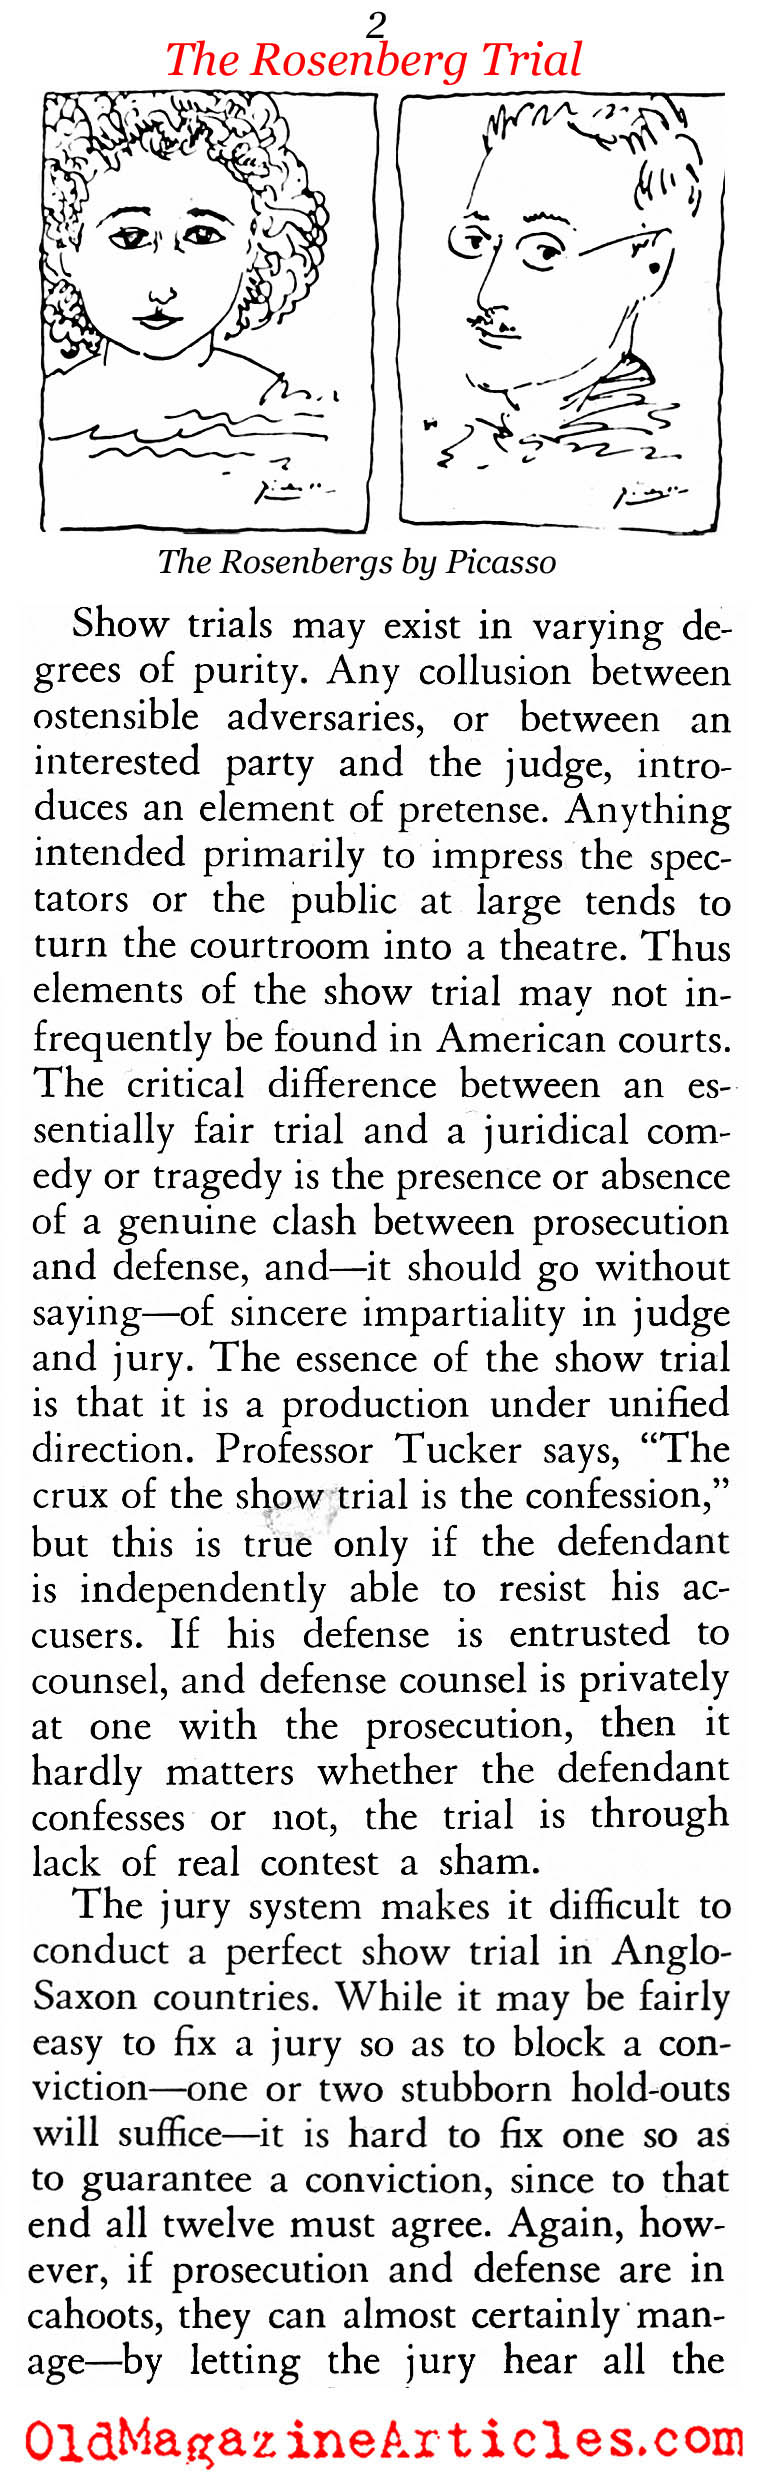 A Second Look At The Rosenberg Trial (American Opinion, 1966, 1967)